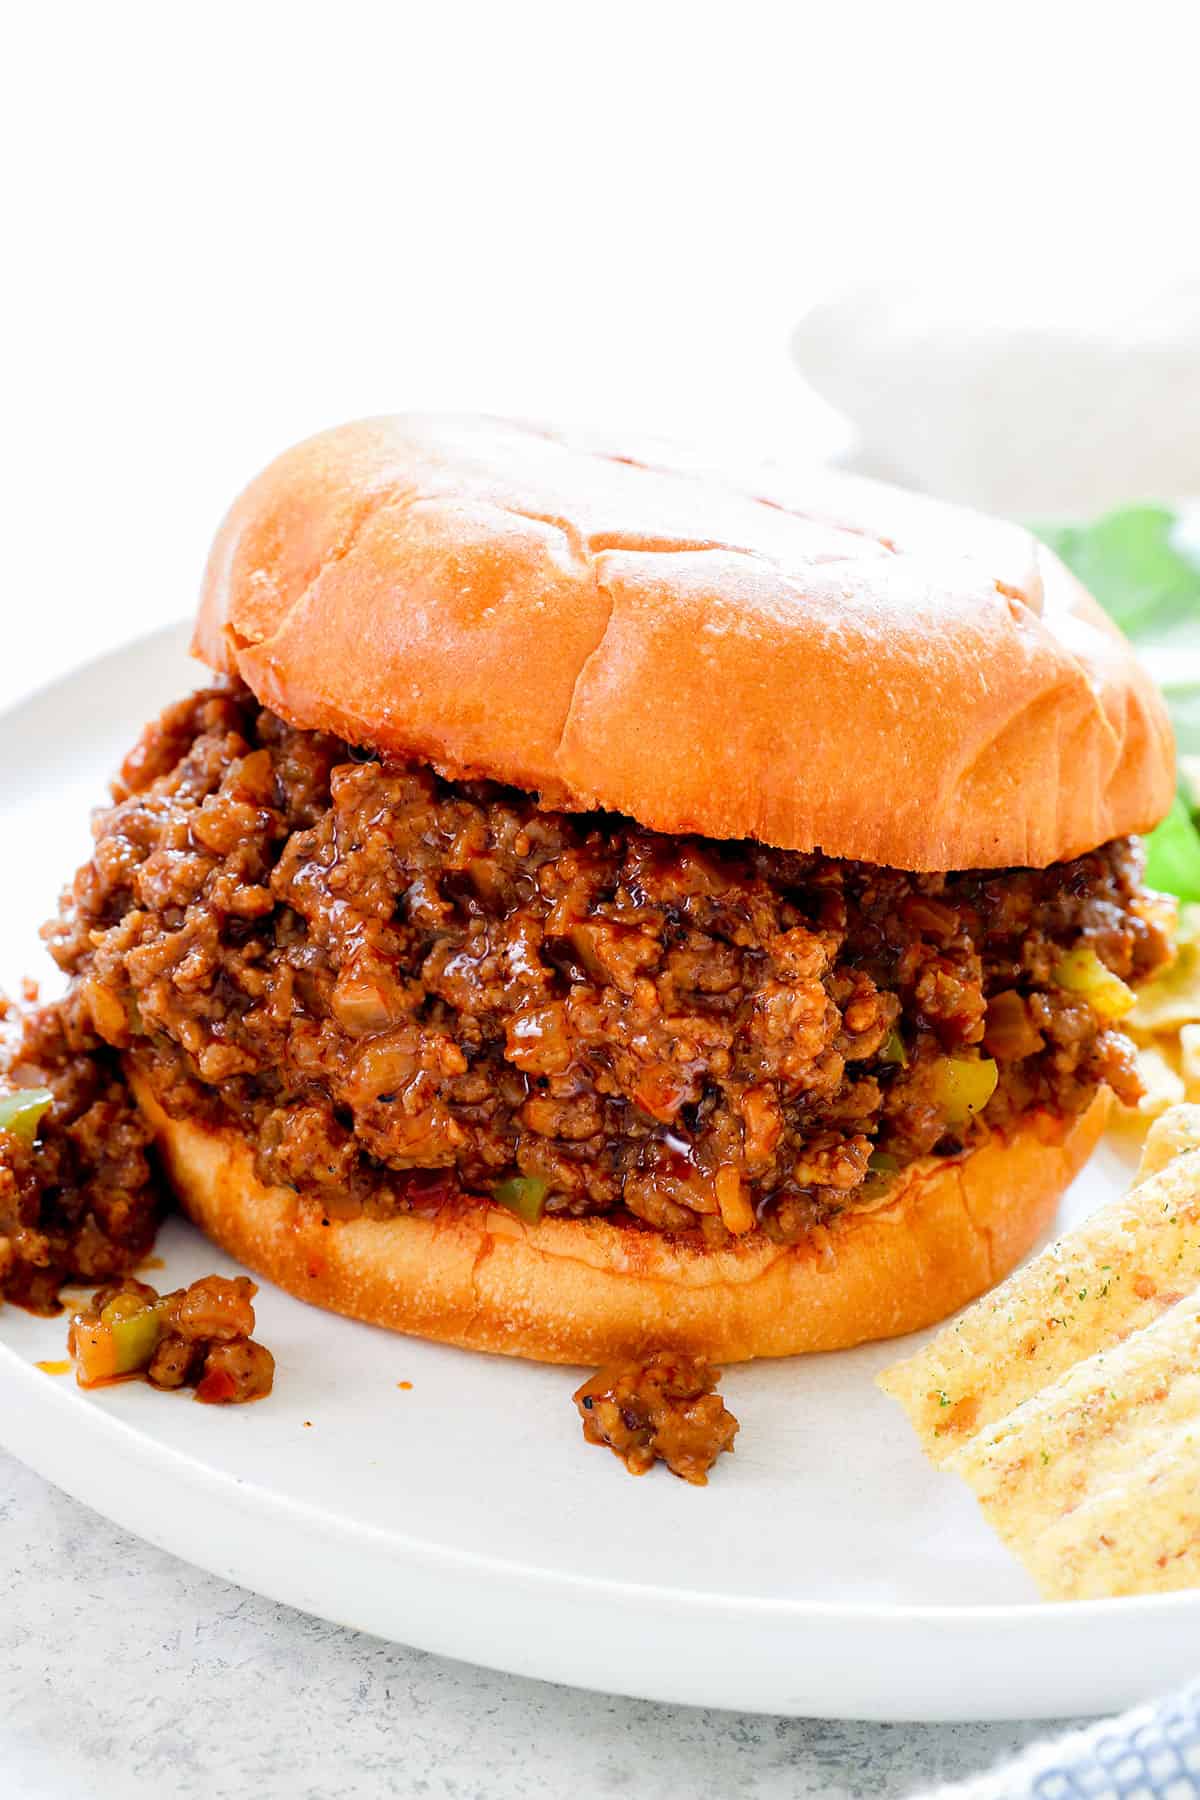 showing how to make sloppy joe recipe by adding the filling to toasted buns